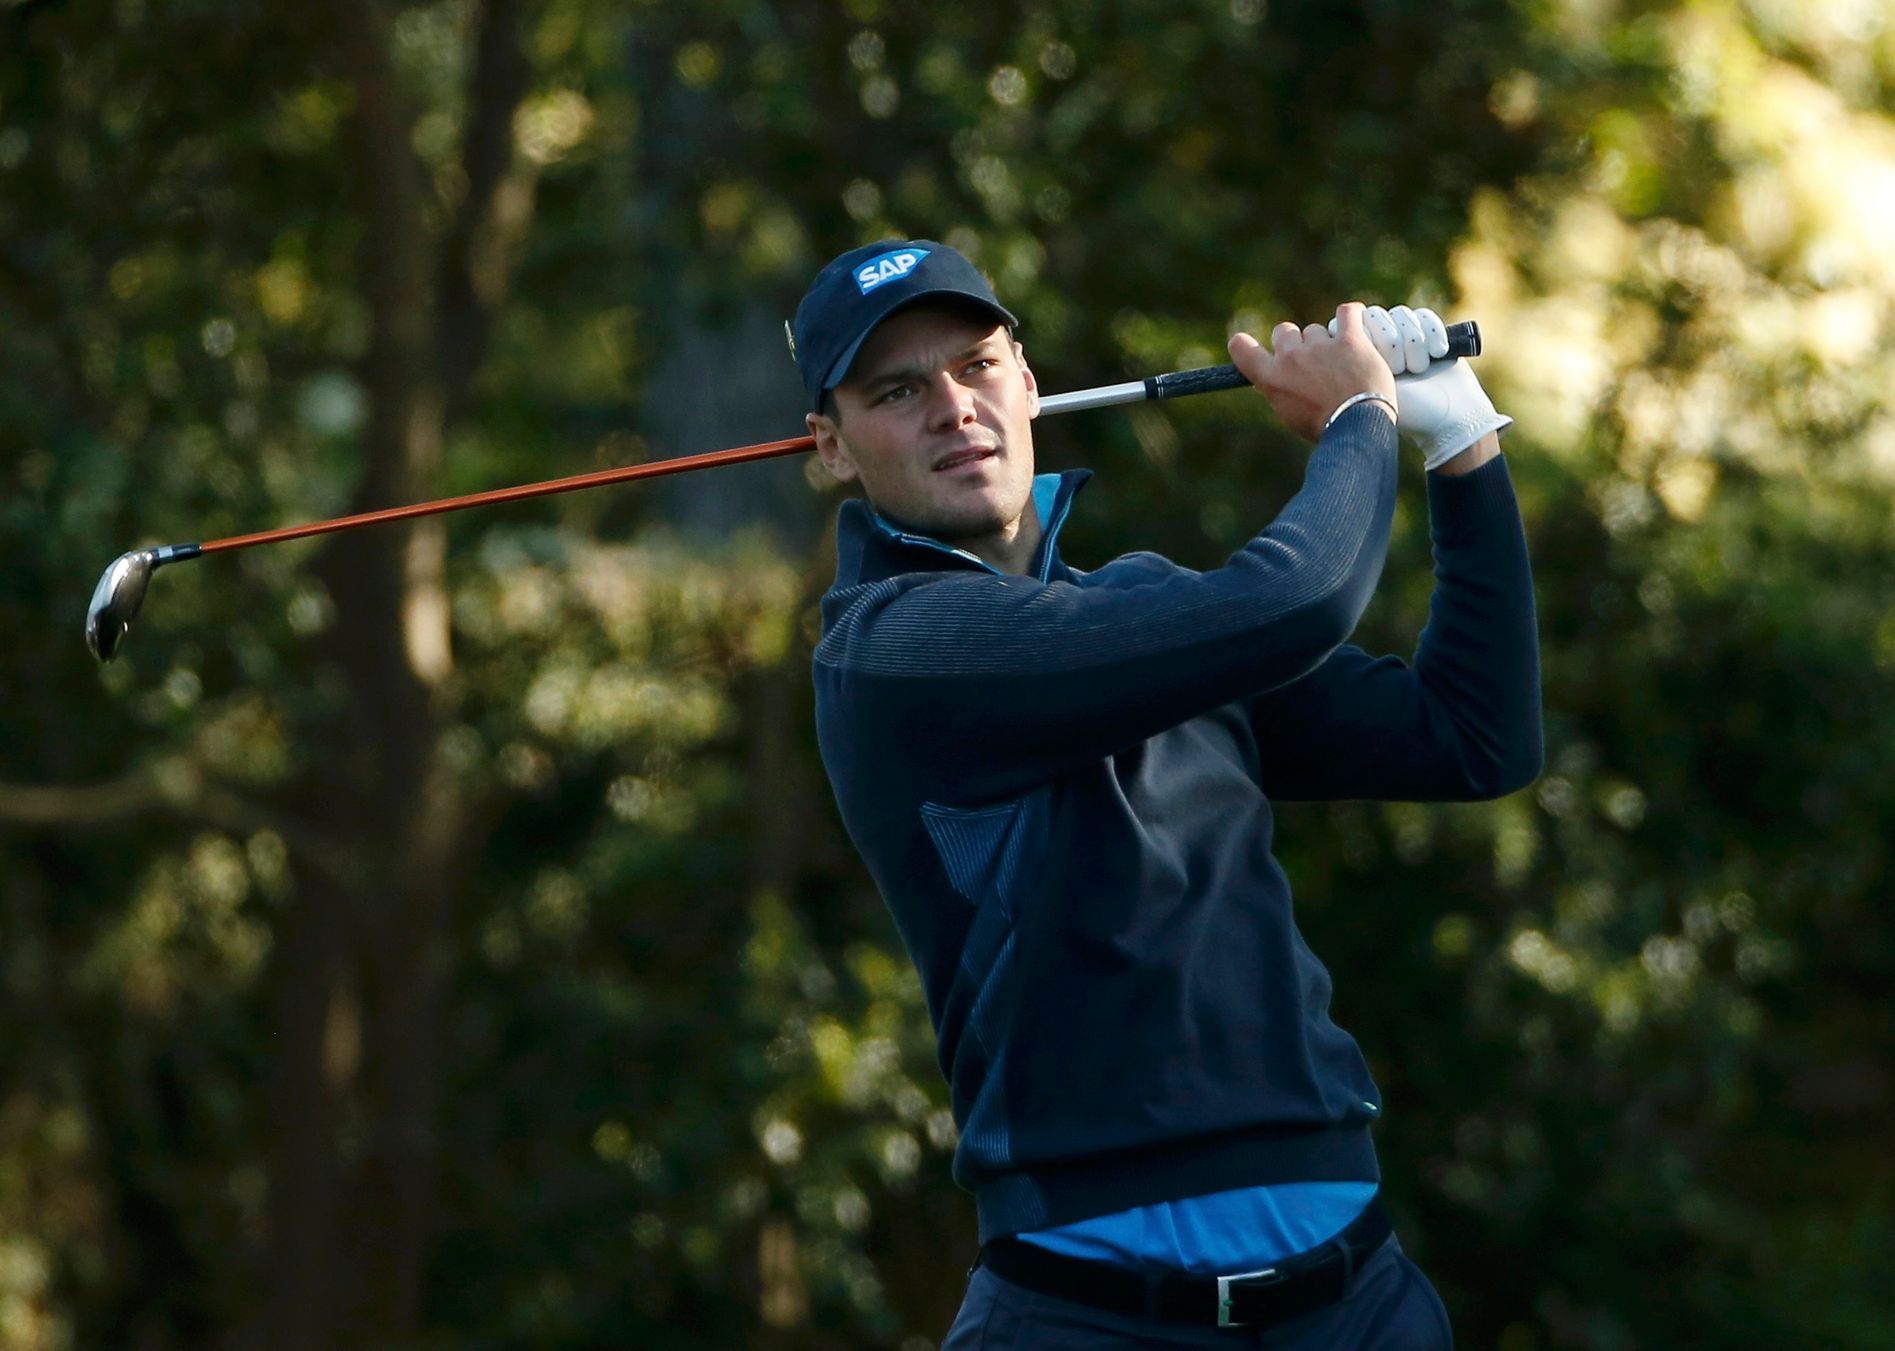 Martin Kaymer of Germany hits his tee shot on the second hole during the first round of the 2014 Masters golf tournament at the Augusta National Golf Club in Augusta